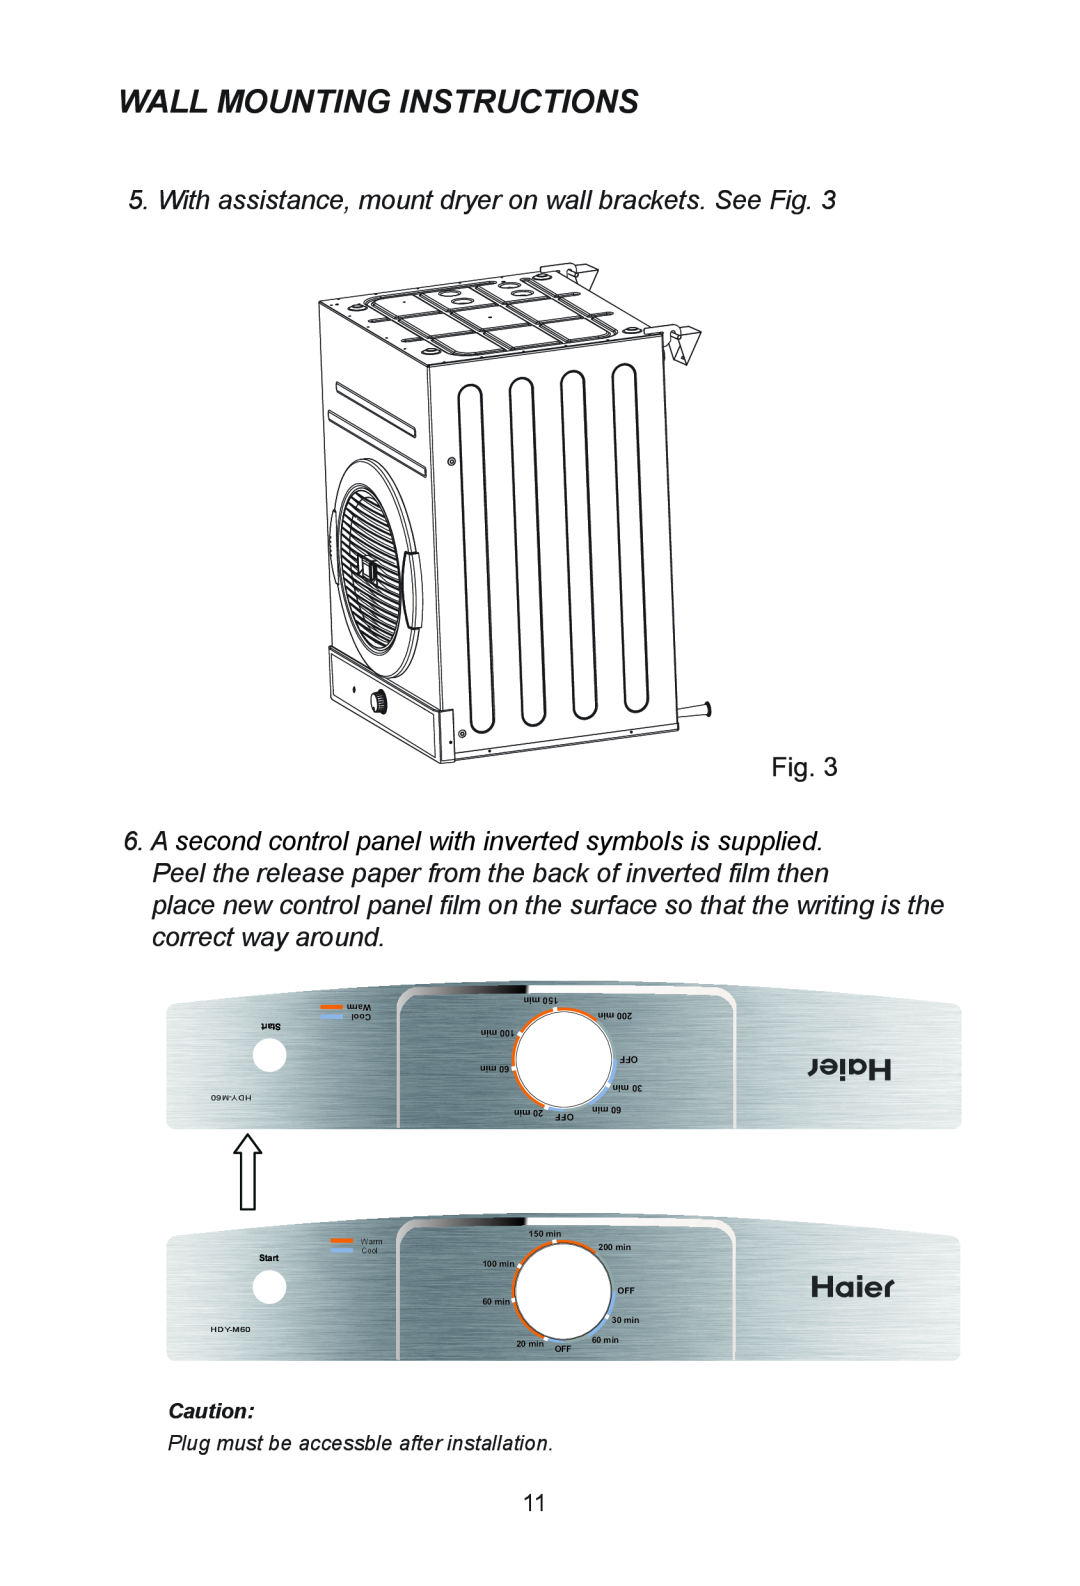 Haier HDY-M40, HDY-M60 manual Wall Mounting Instructions 